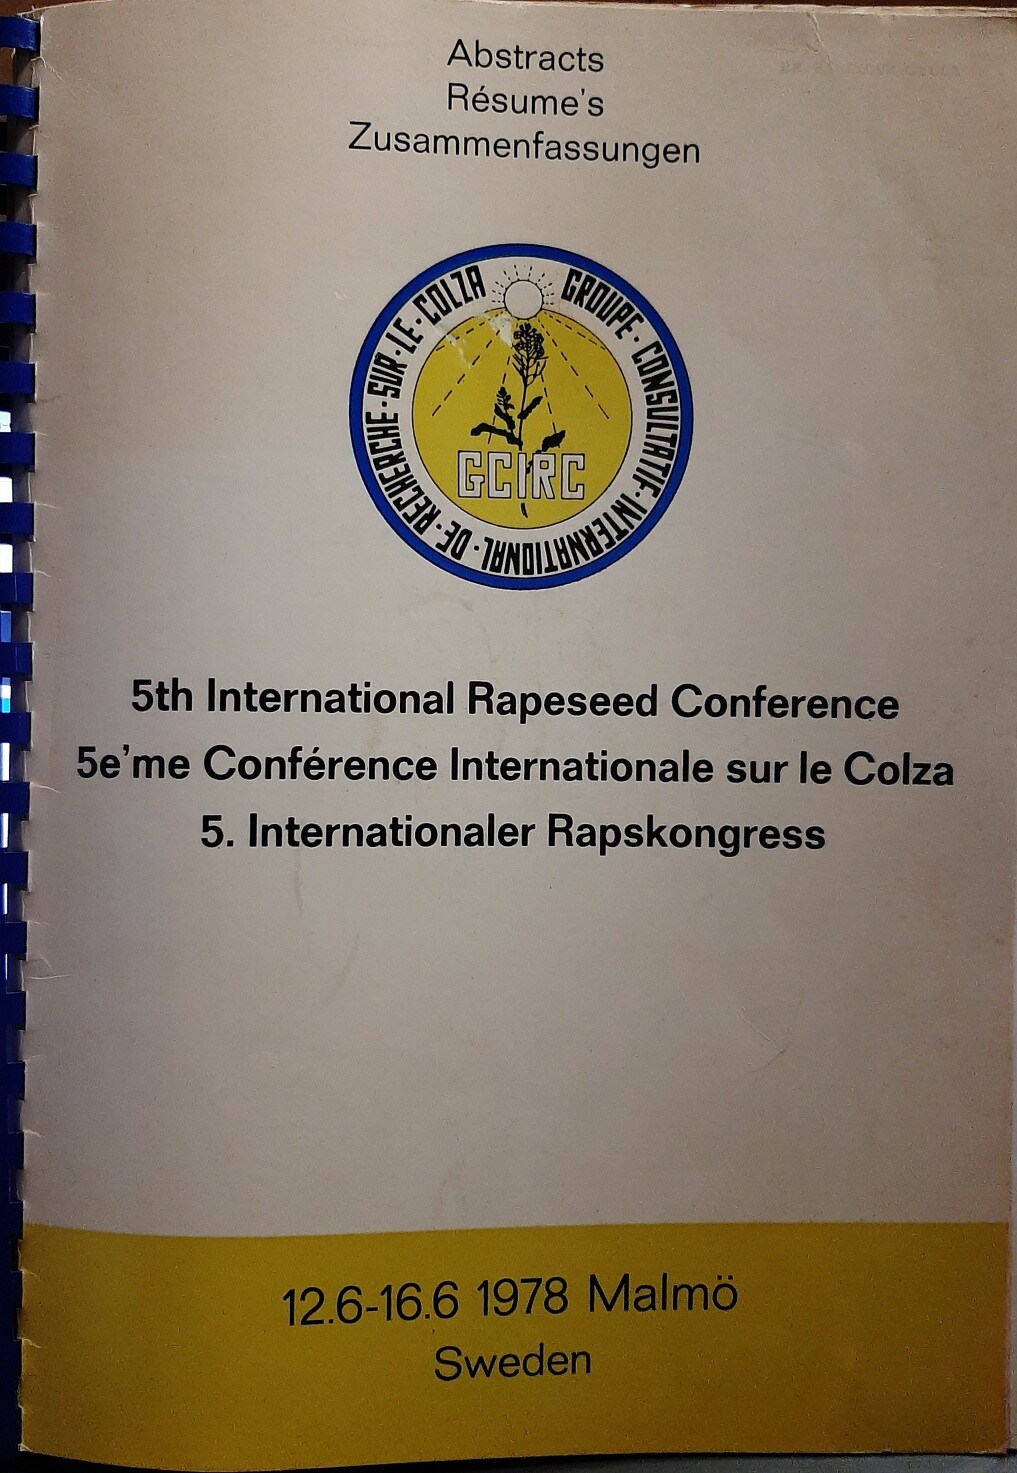 Abstracts: 5th International Rapeseed Conference (Rippl-Rónai Múzeum CC BY-NC-ND)